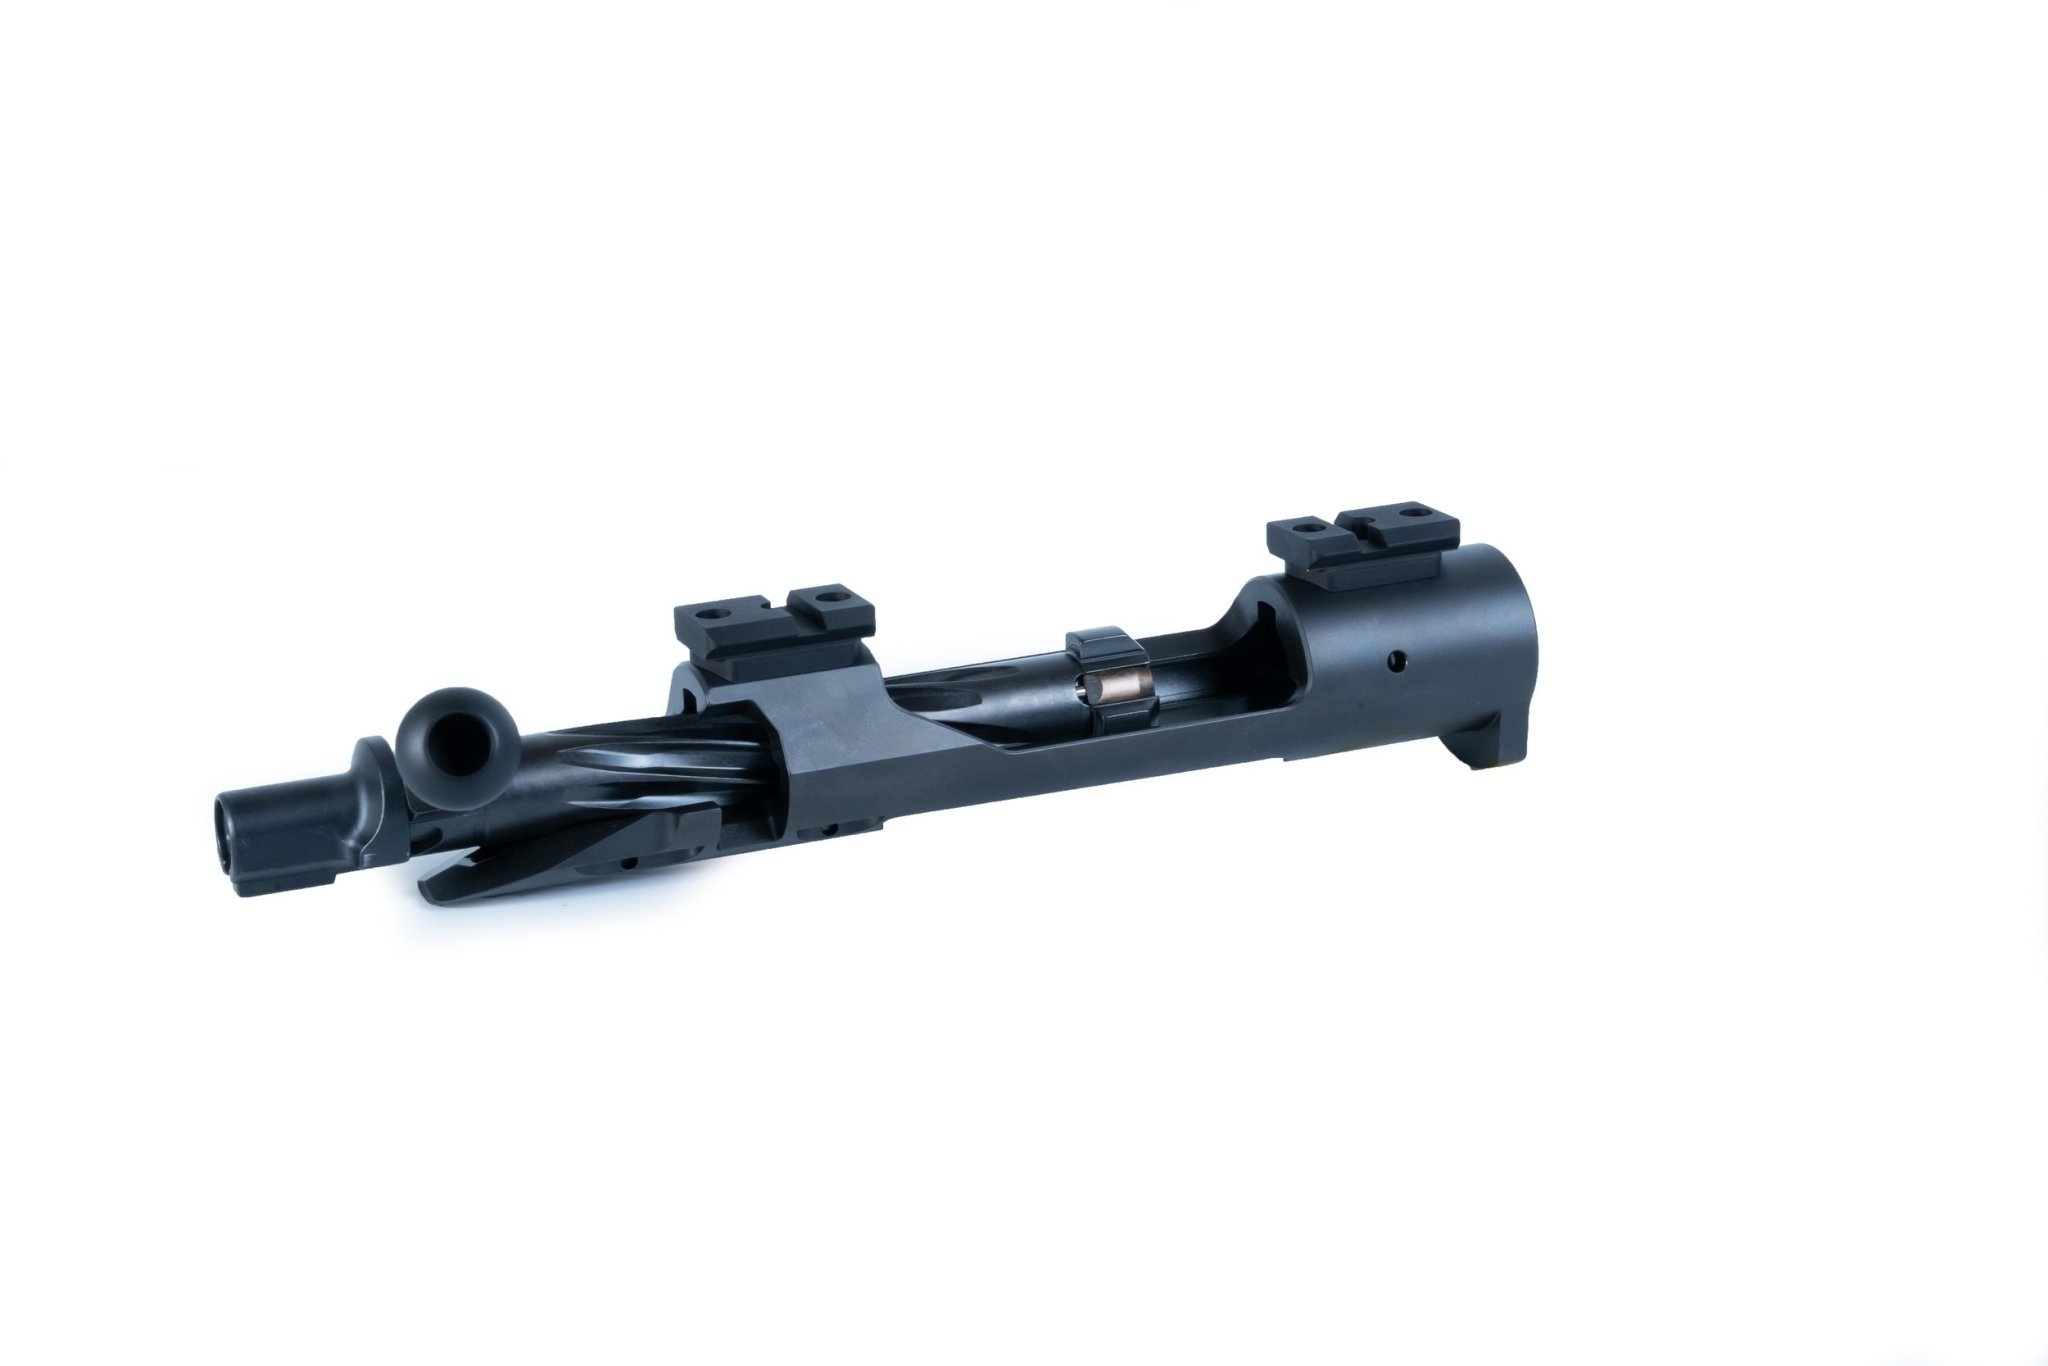 K.S. ARMS K.S. ARMS LA3RL LIGHTWEIGHT 3-LUG RIFLE ACTION, LONG, LH, 532 BF, REPEATER, 20 MOA